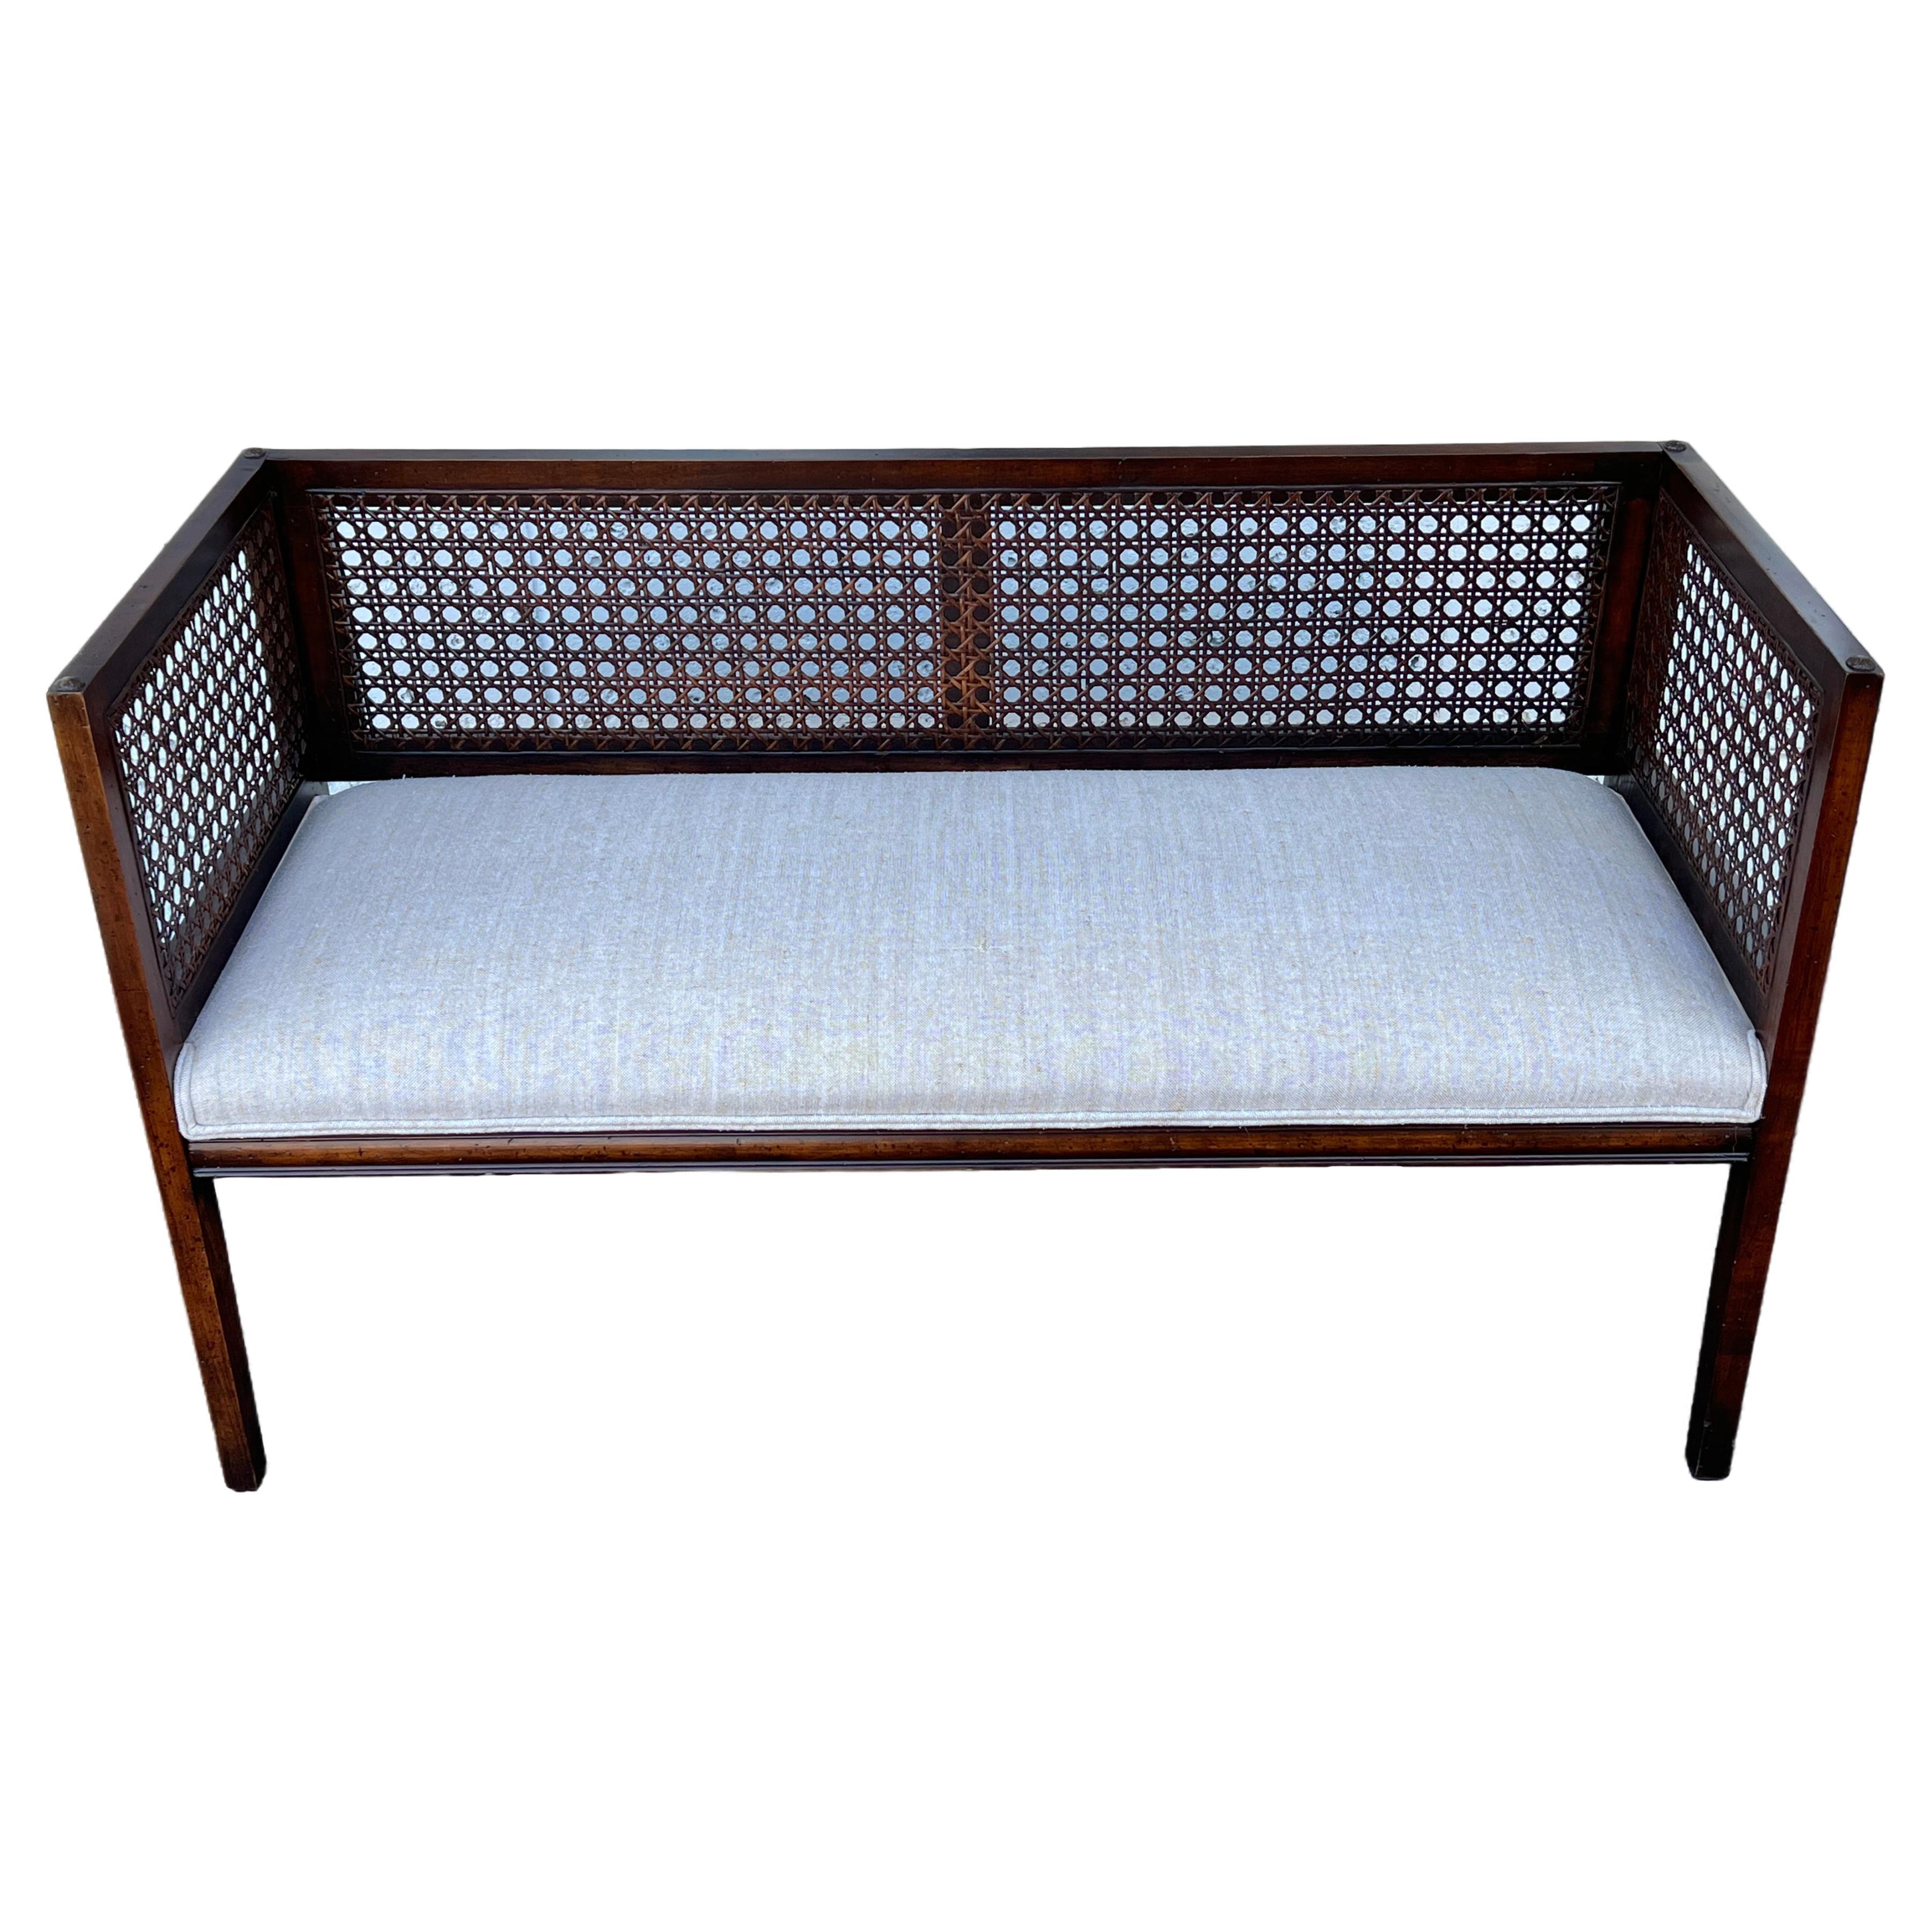 A Classic Upholstered Bench With Caned Back